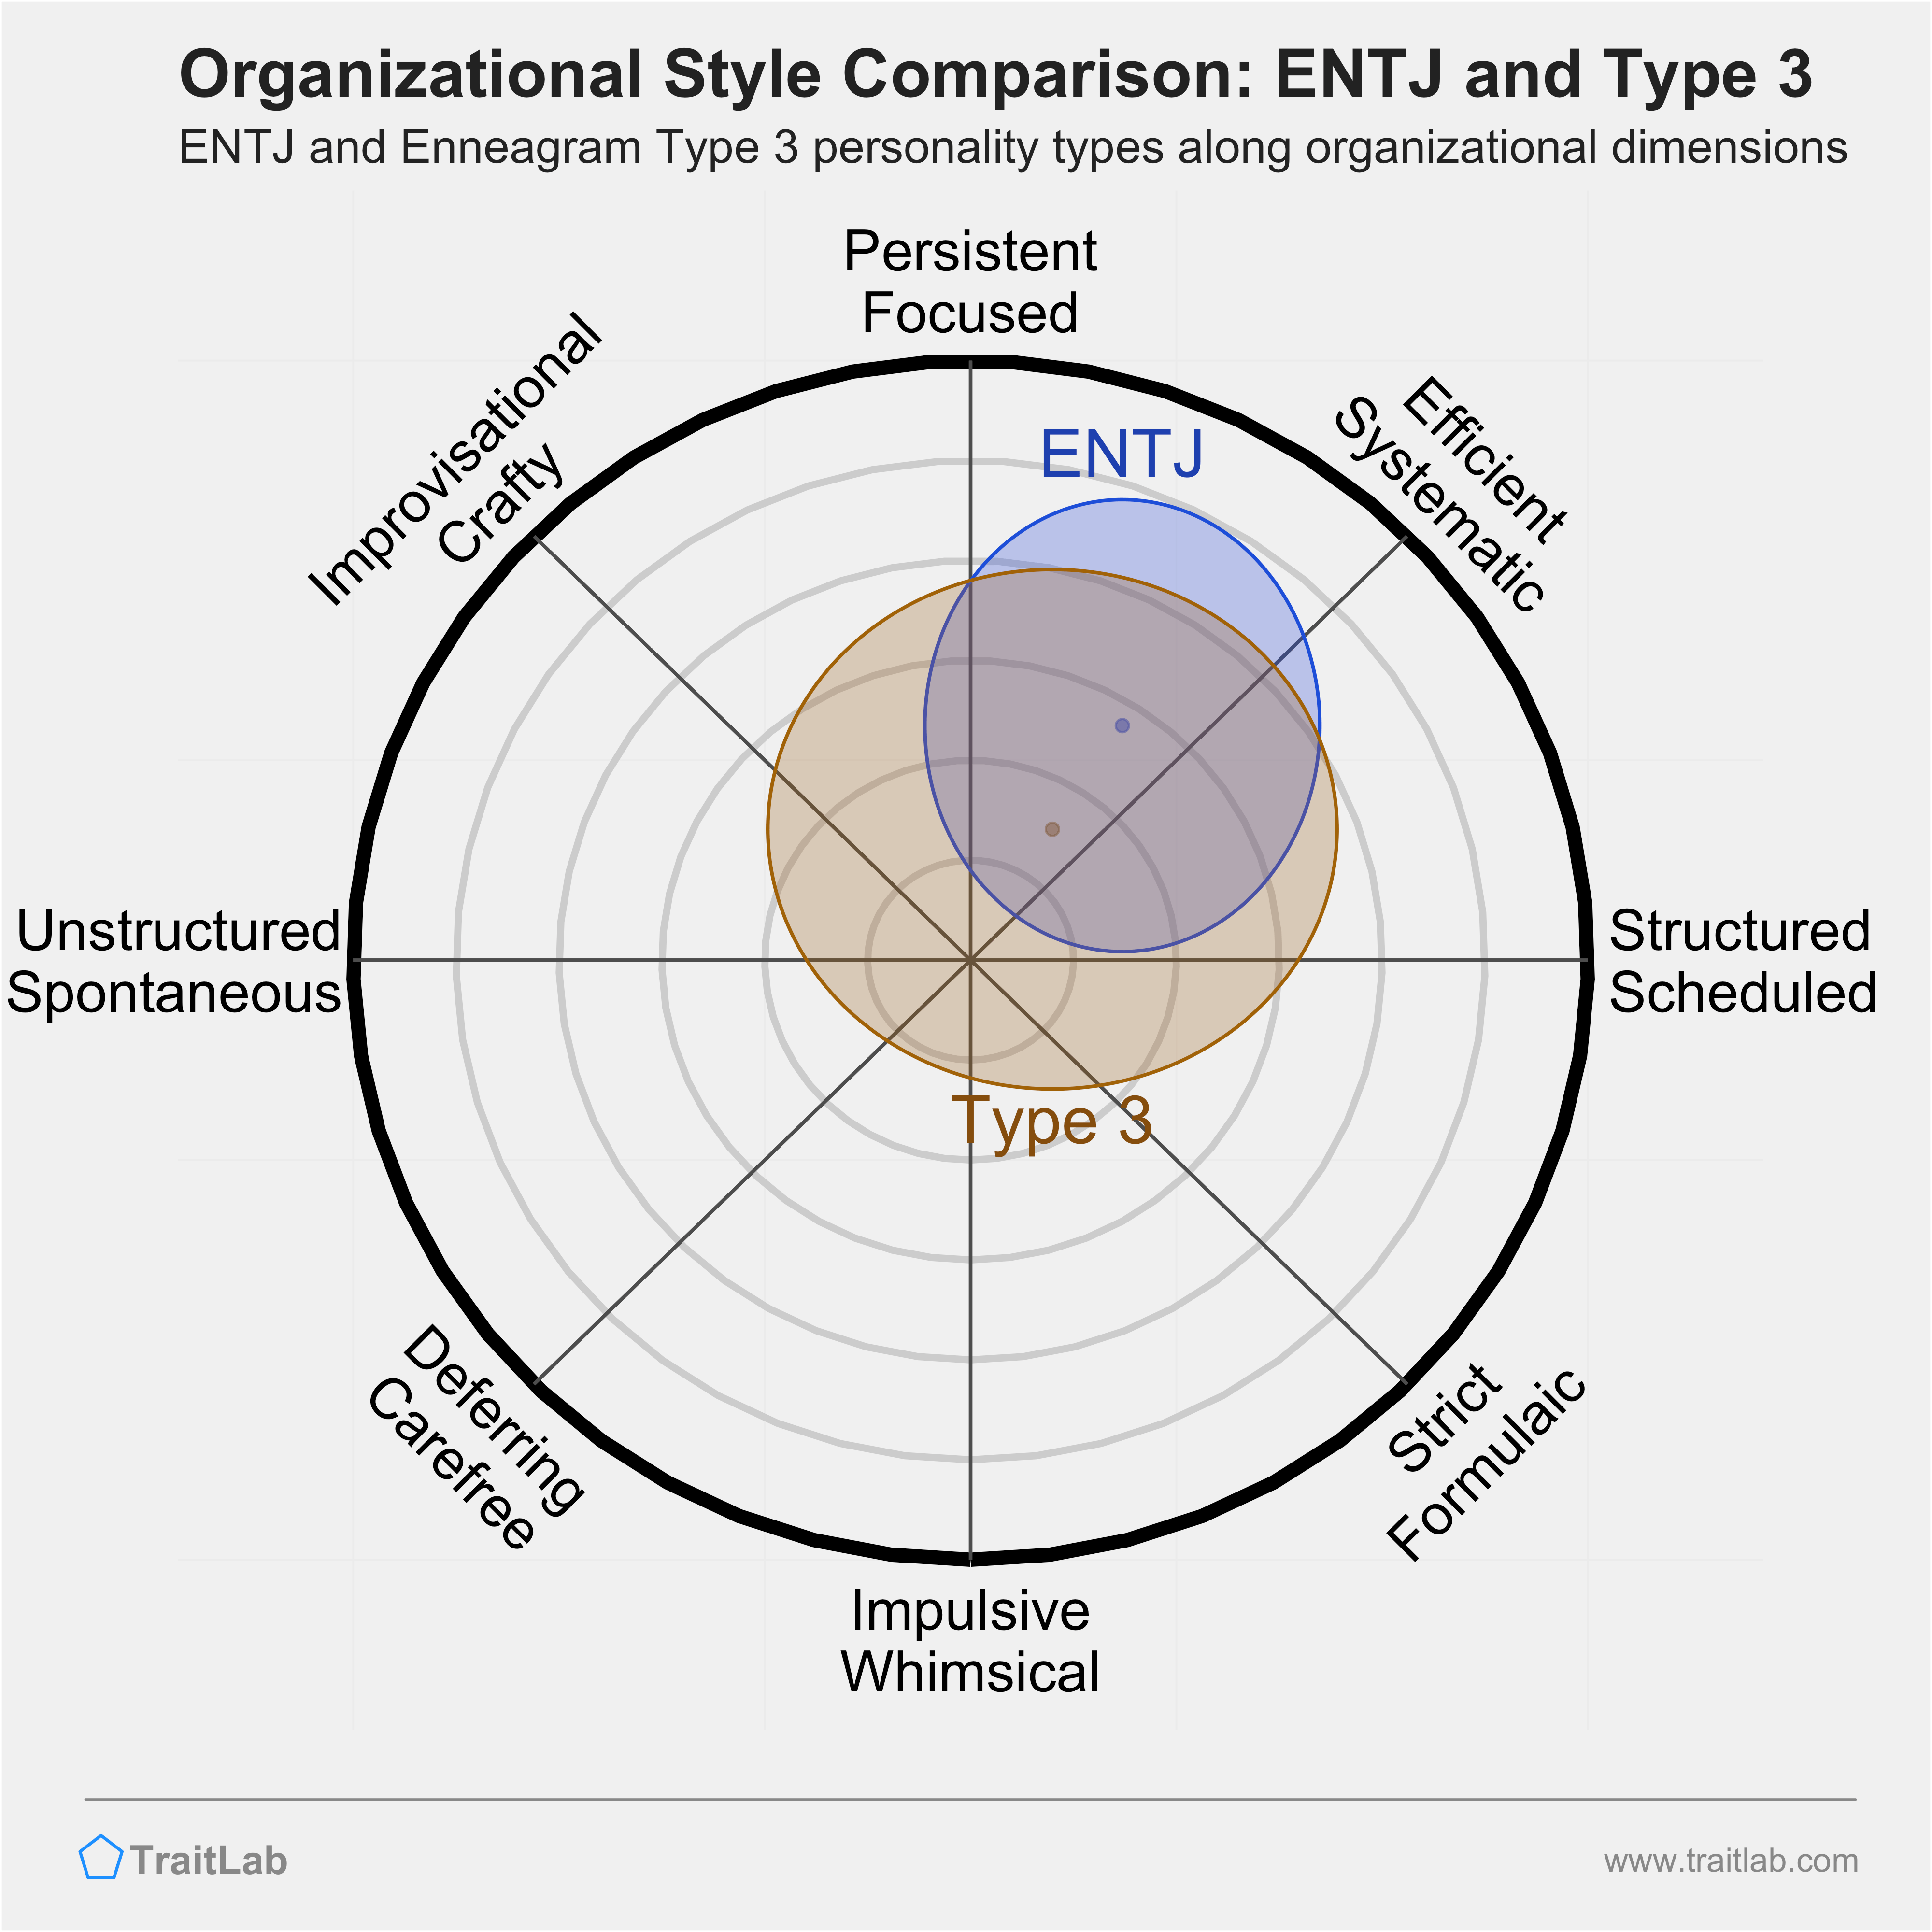 ENTJ and Type 3 comparison across organizational dimensions